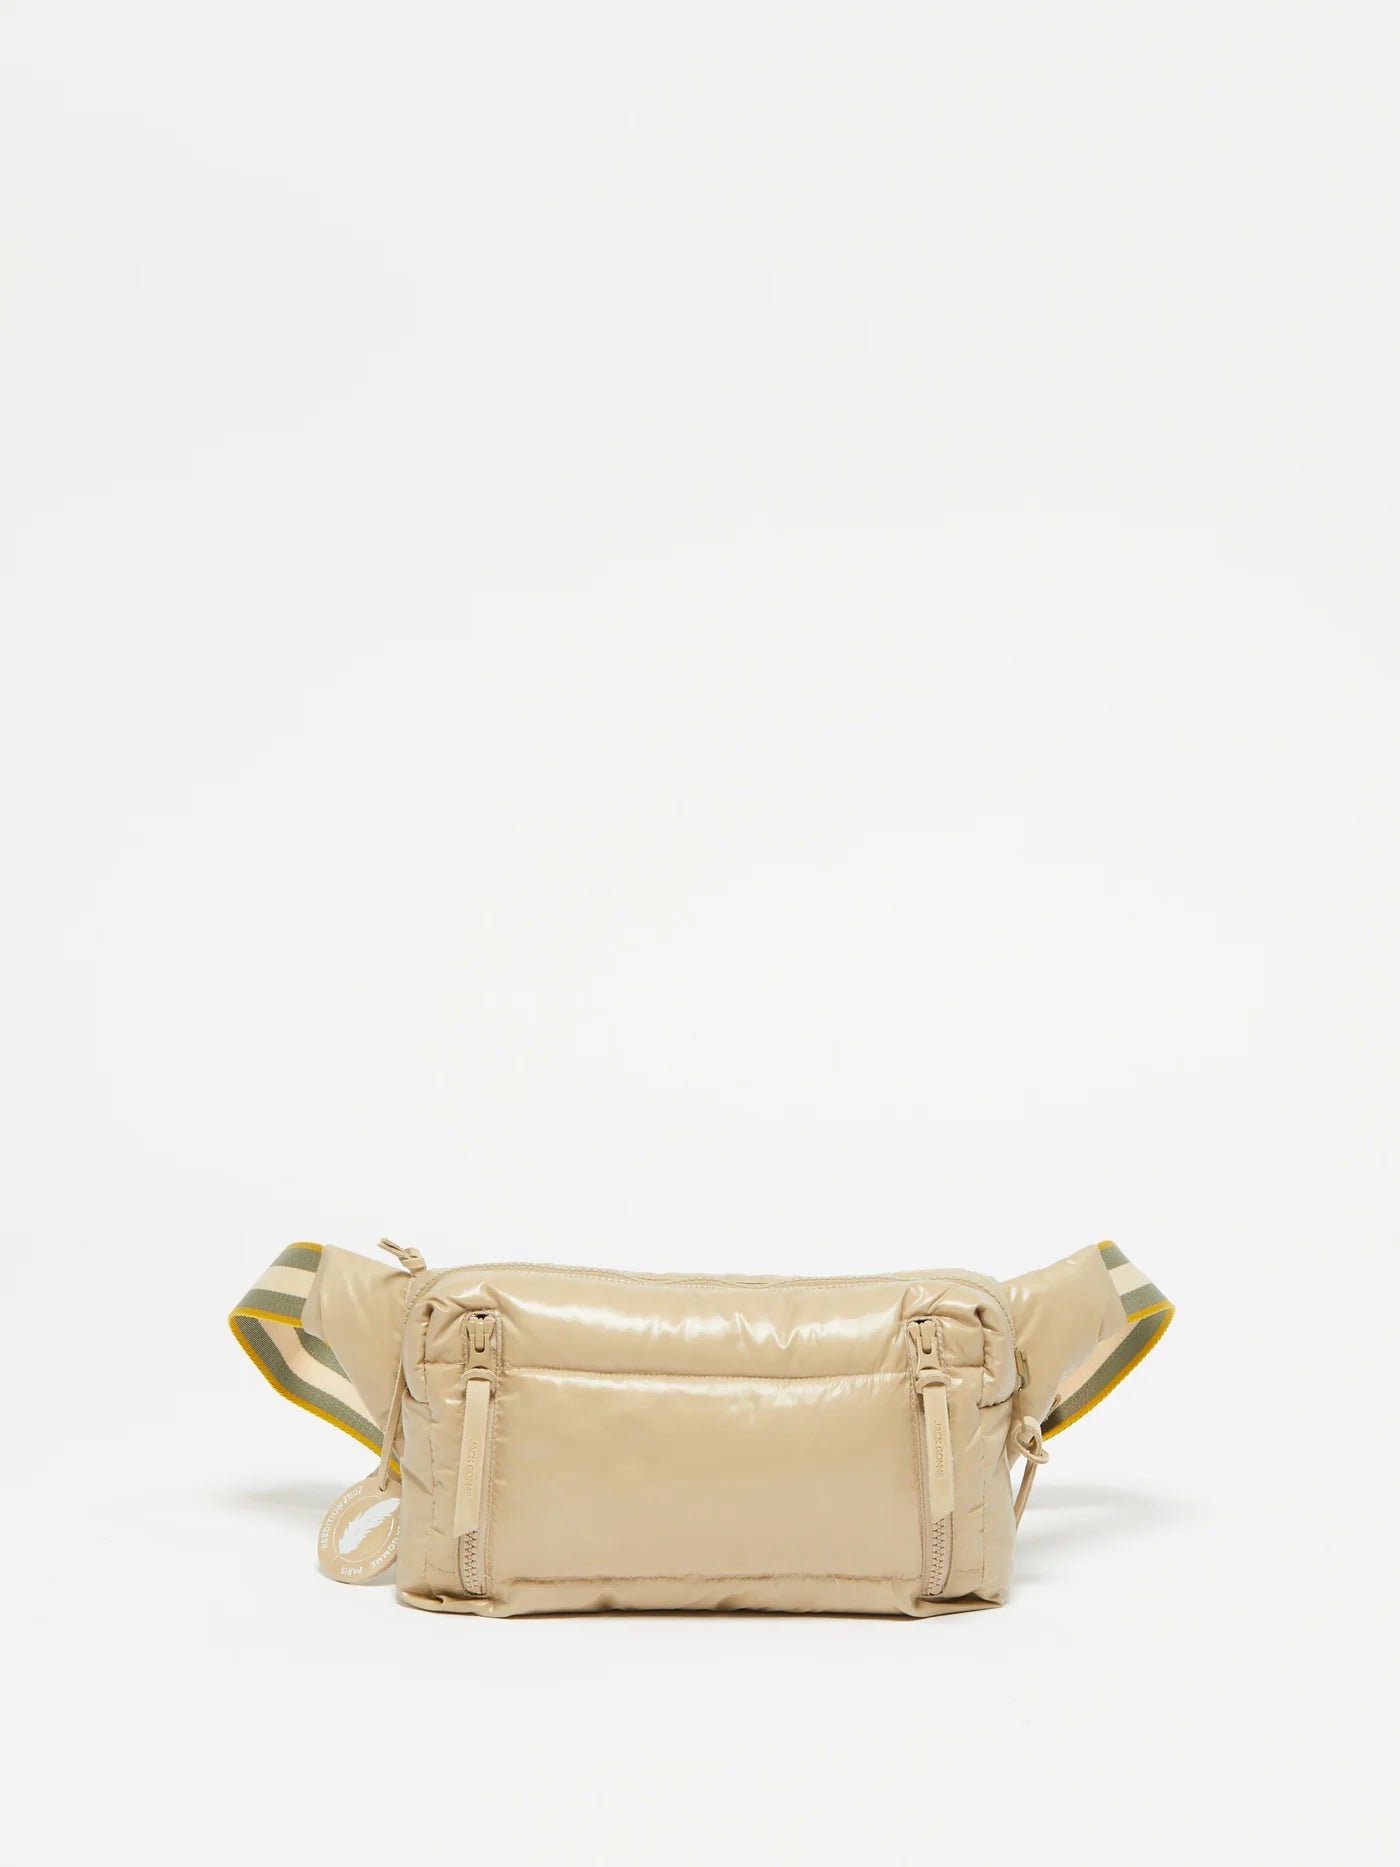 LALAND Crossbody Bag - Biscuit